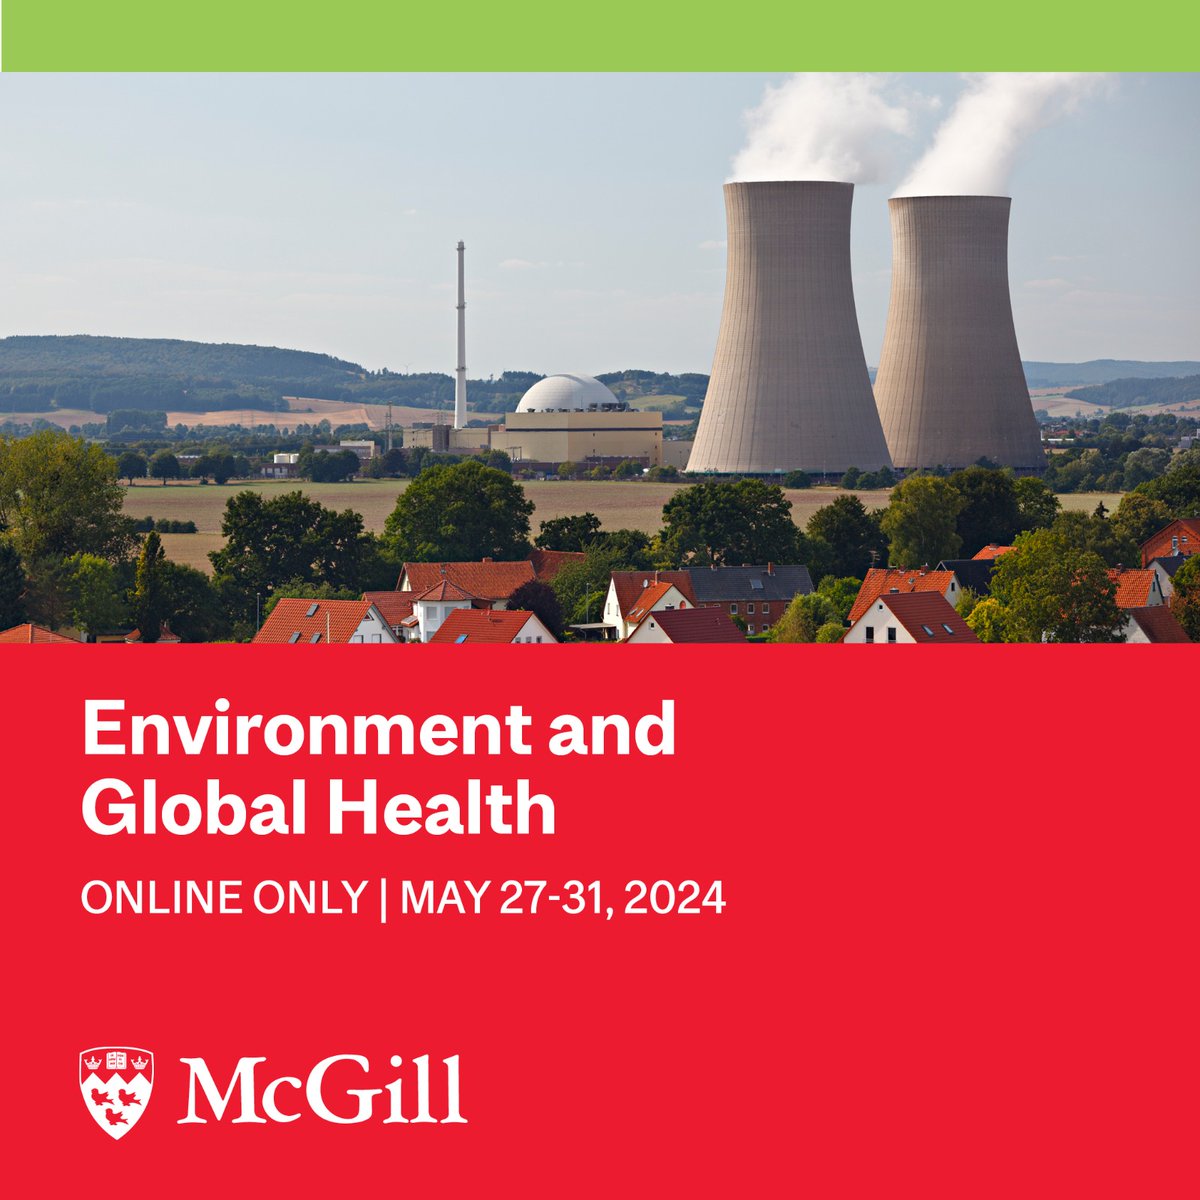 Designed for health practitioners, policy advisors, and students who wish to gain insight into how human health and well-being is directly affected by environmental factors - the 'Environment and Global Health' course is open for summer registration! #McGill #healthyclimate